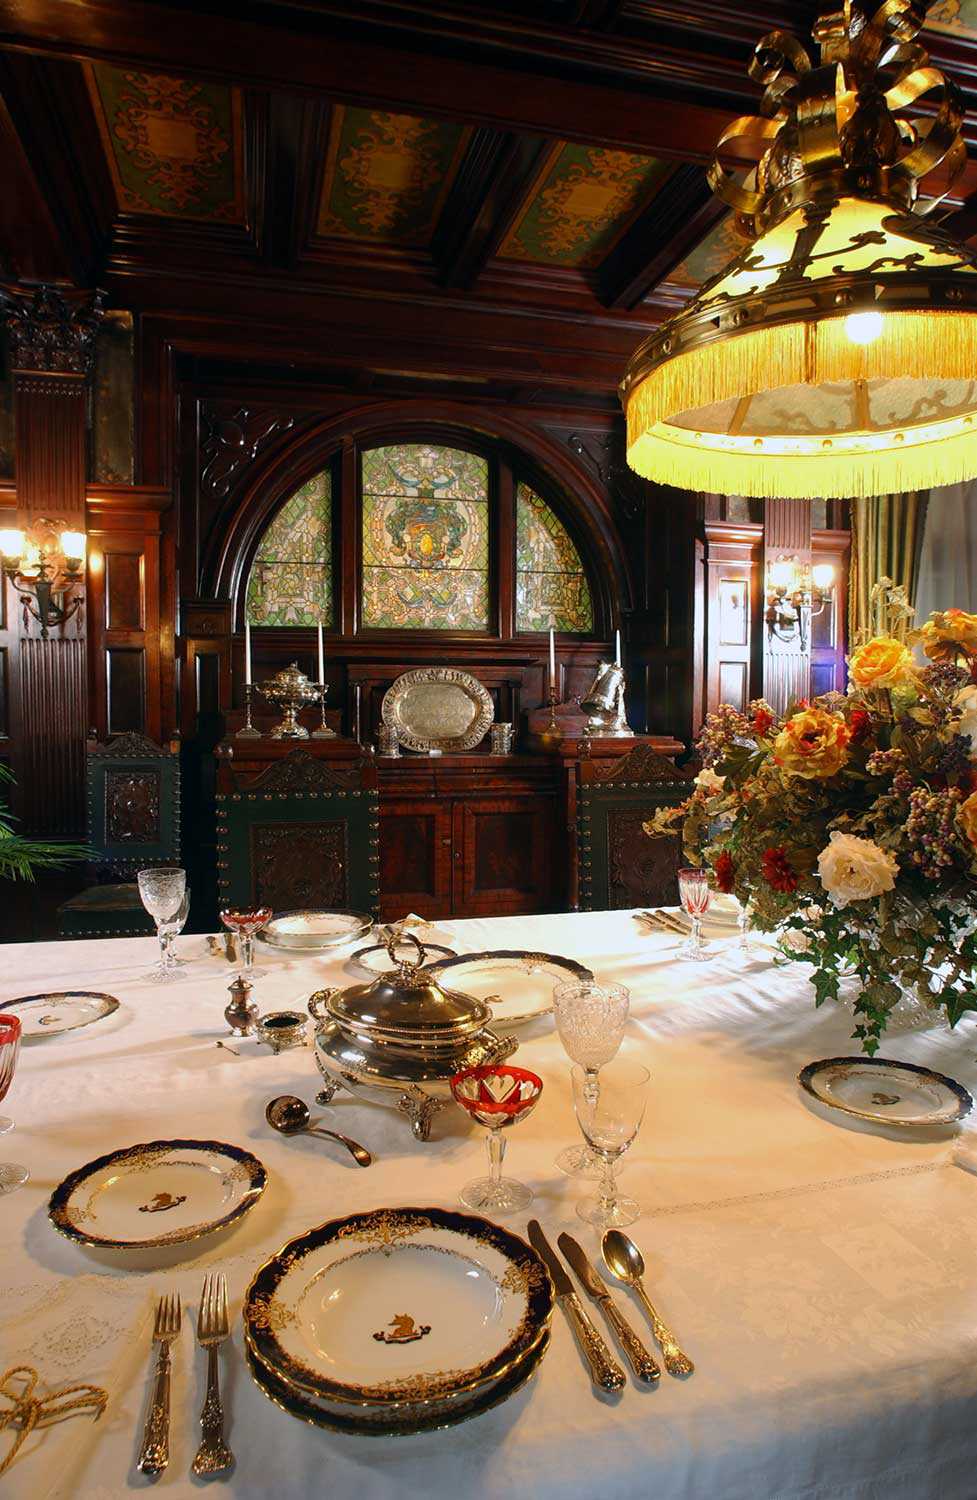 The dining room at Fulford Place in Brockville